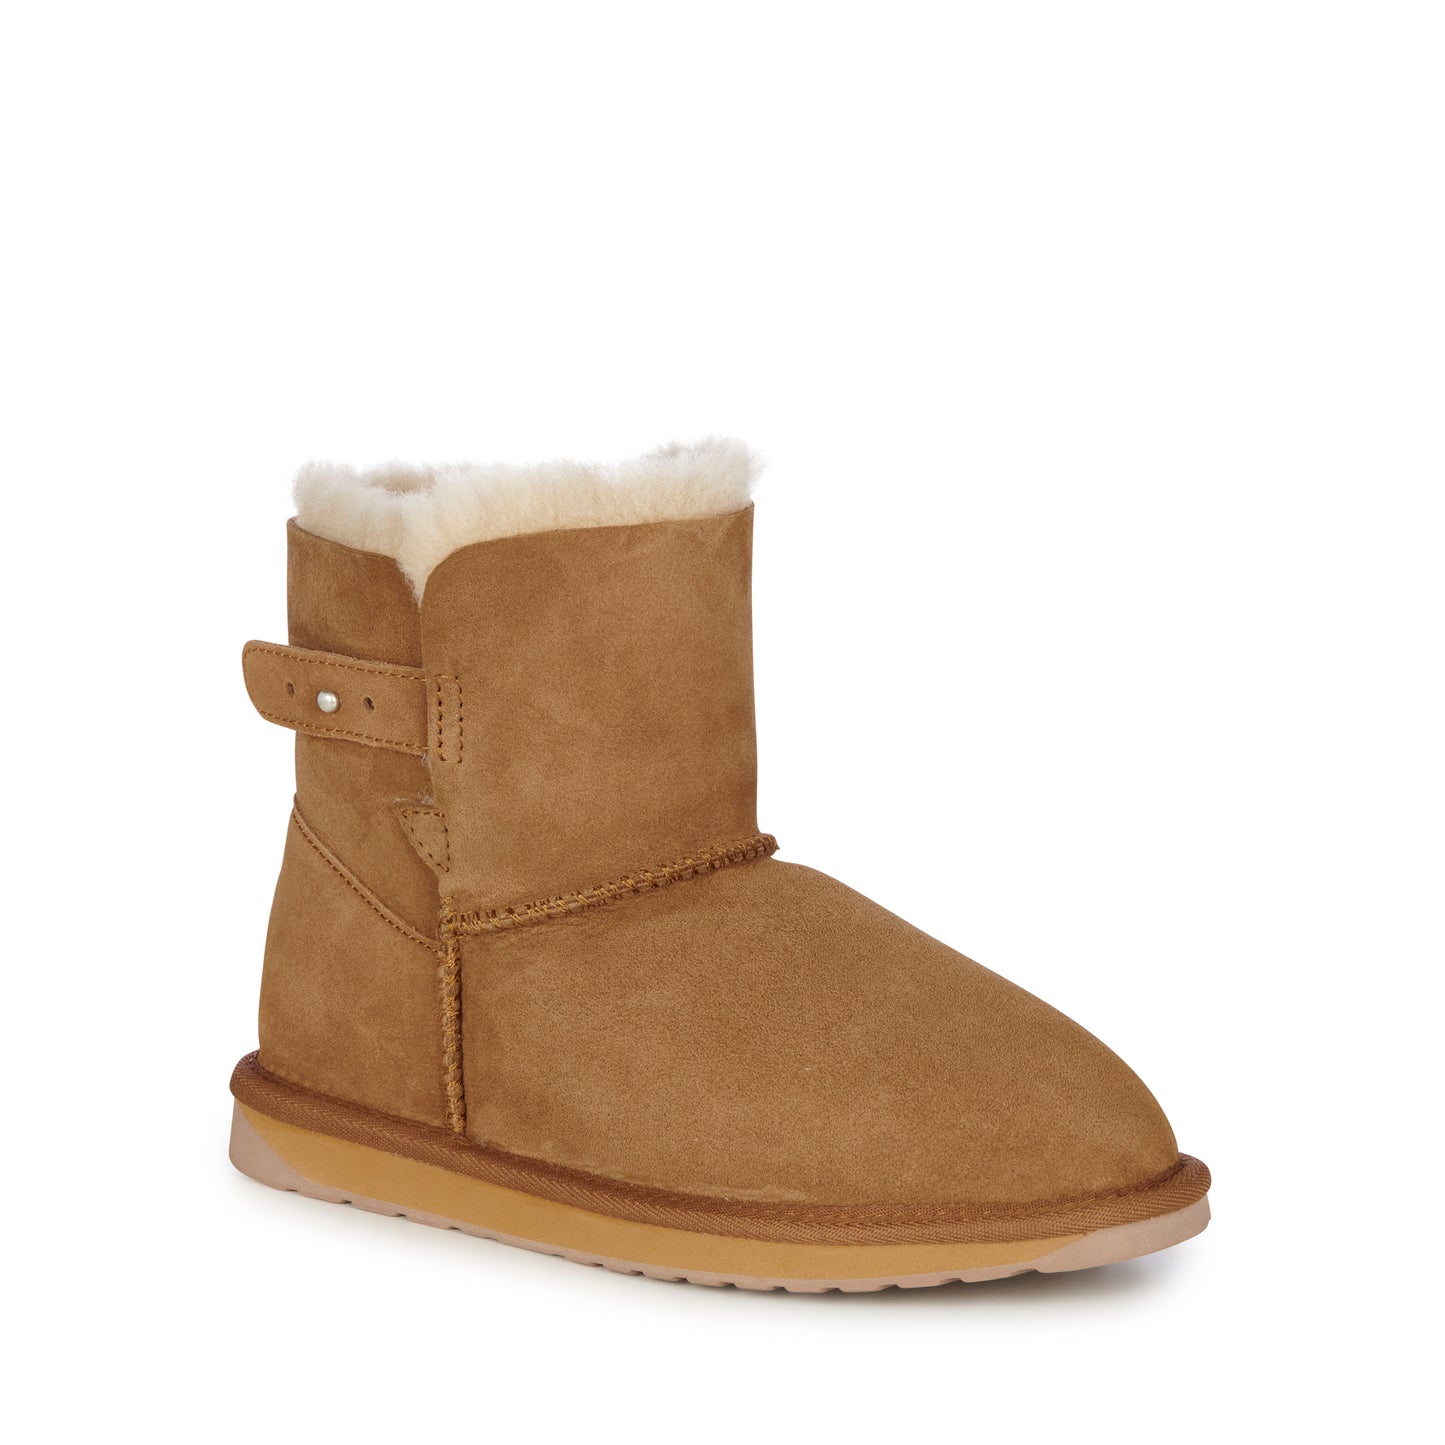 Summerlands Water Resistant Sheepskin Ankle Boot With Cuff